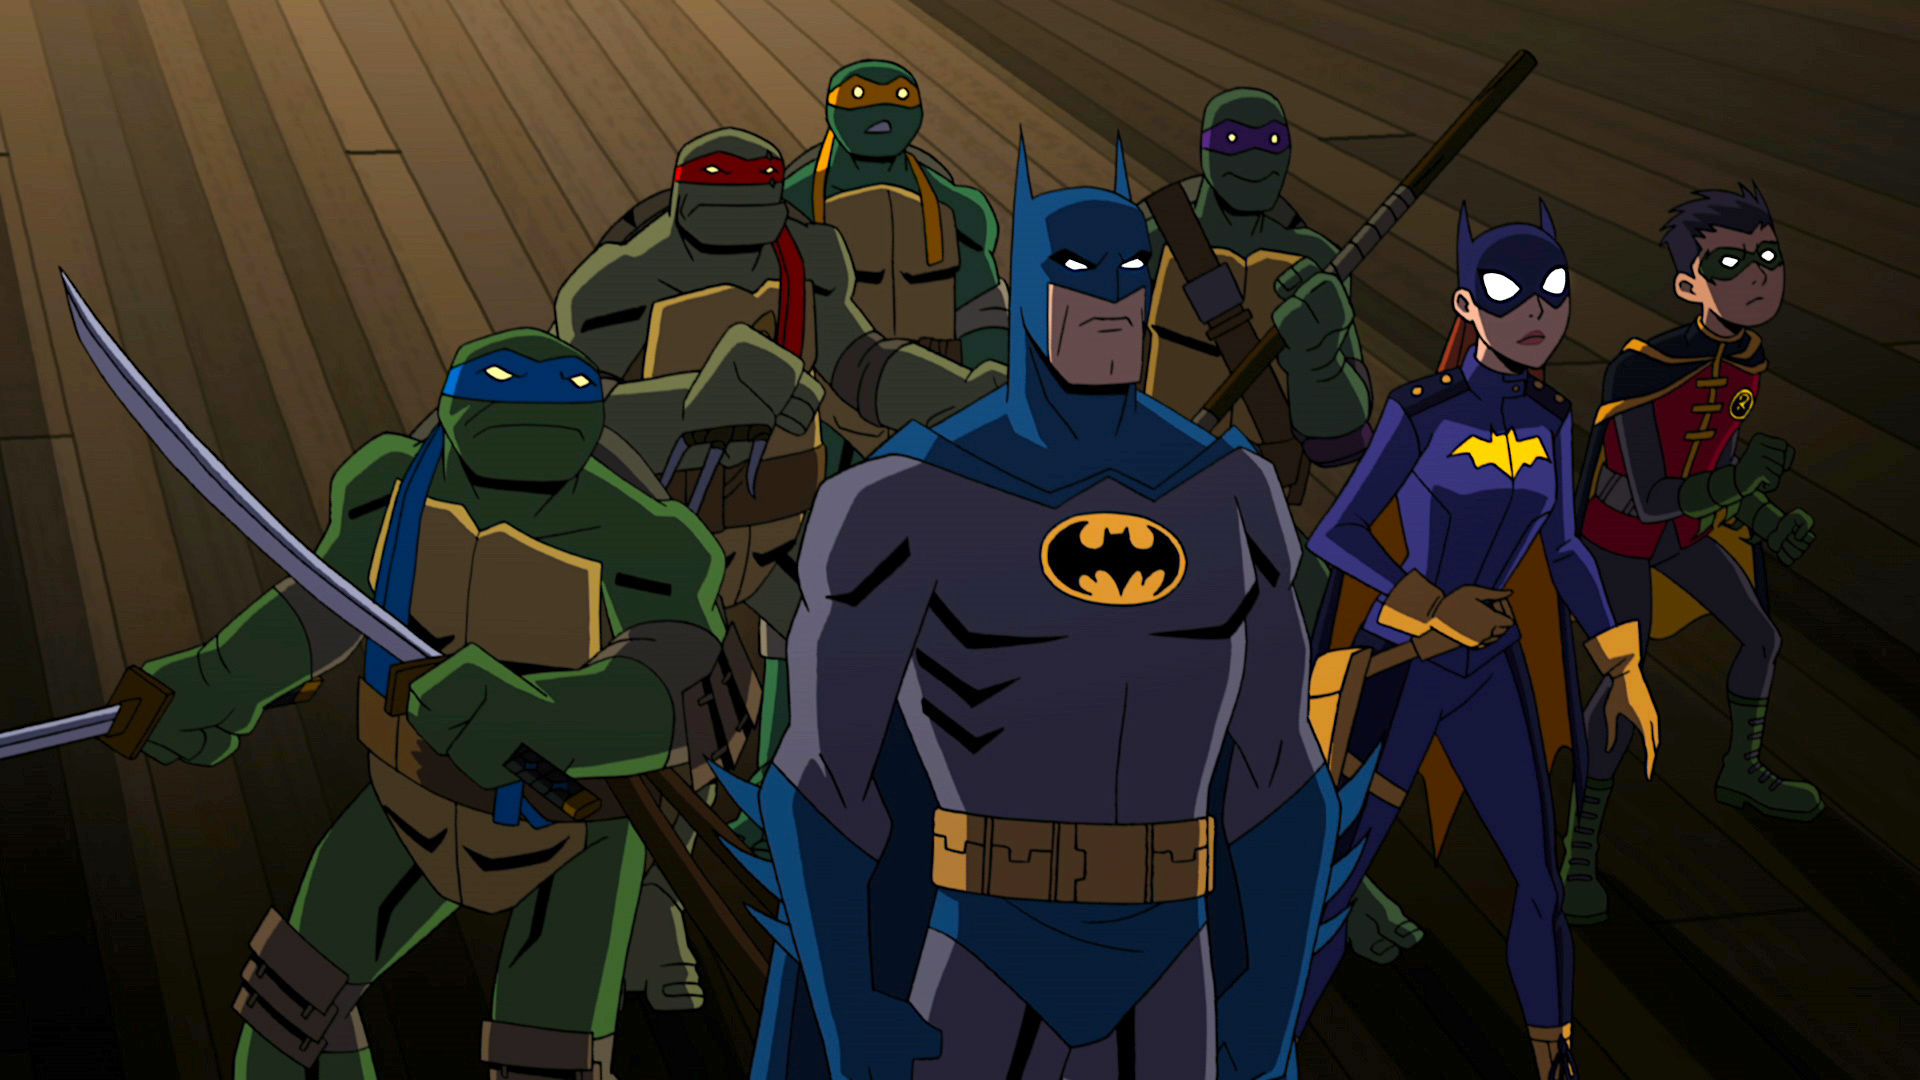 Exclusive: Batman and the Teenage Mutant Ninja Turtles meet in their first  animated movie crossover | SYFY WIRE